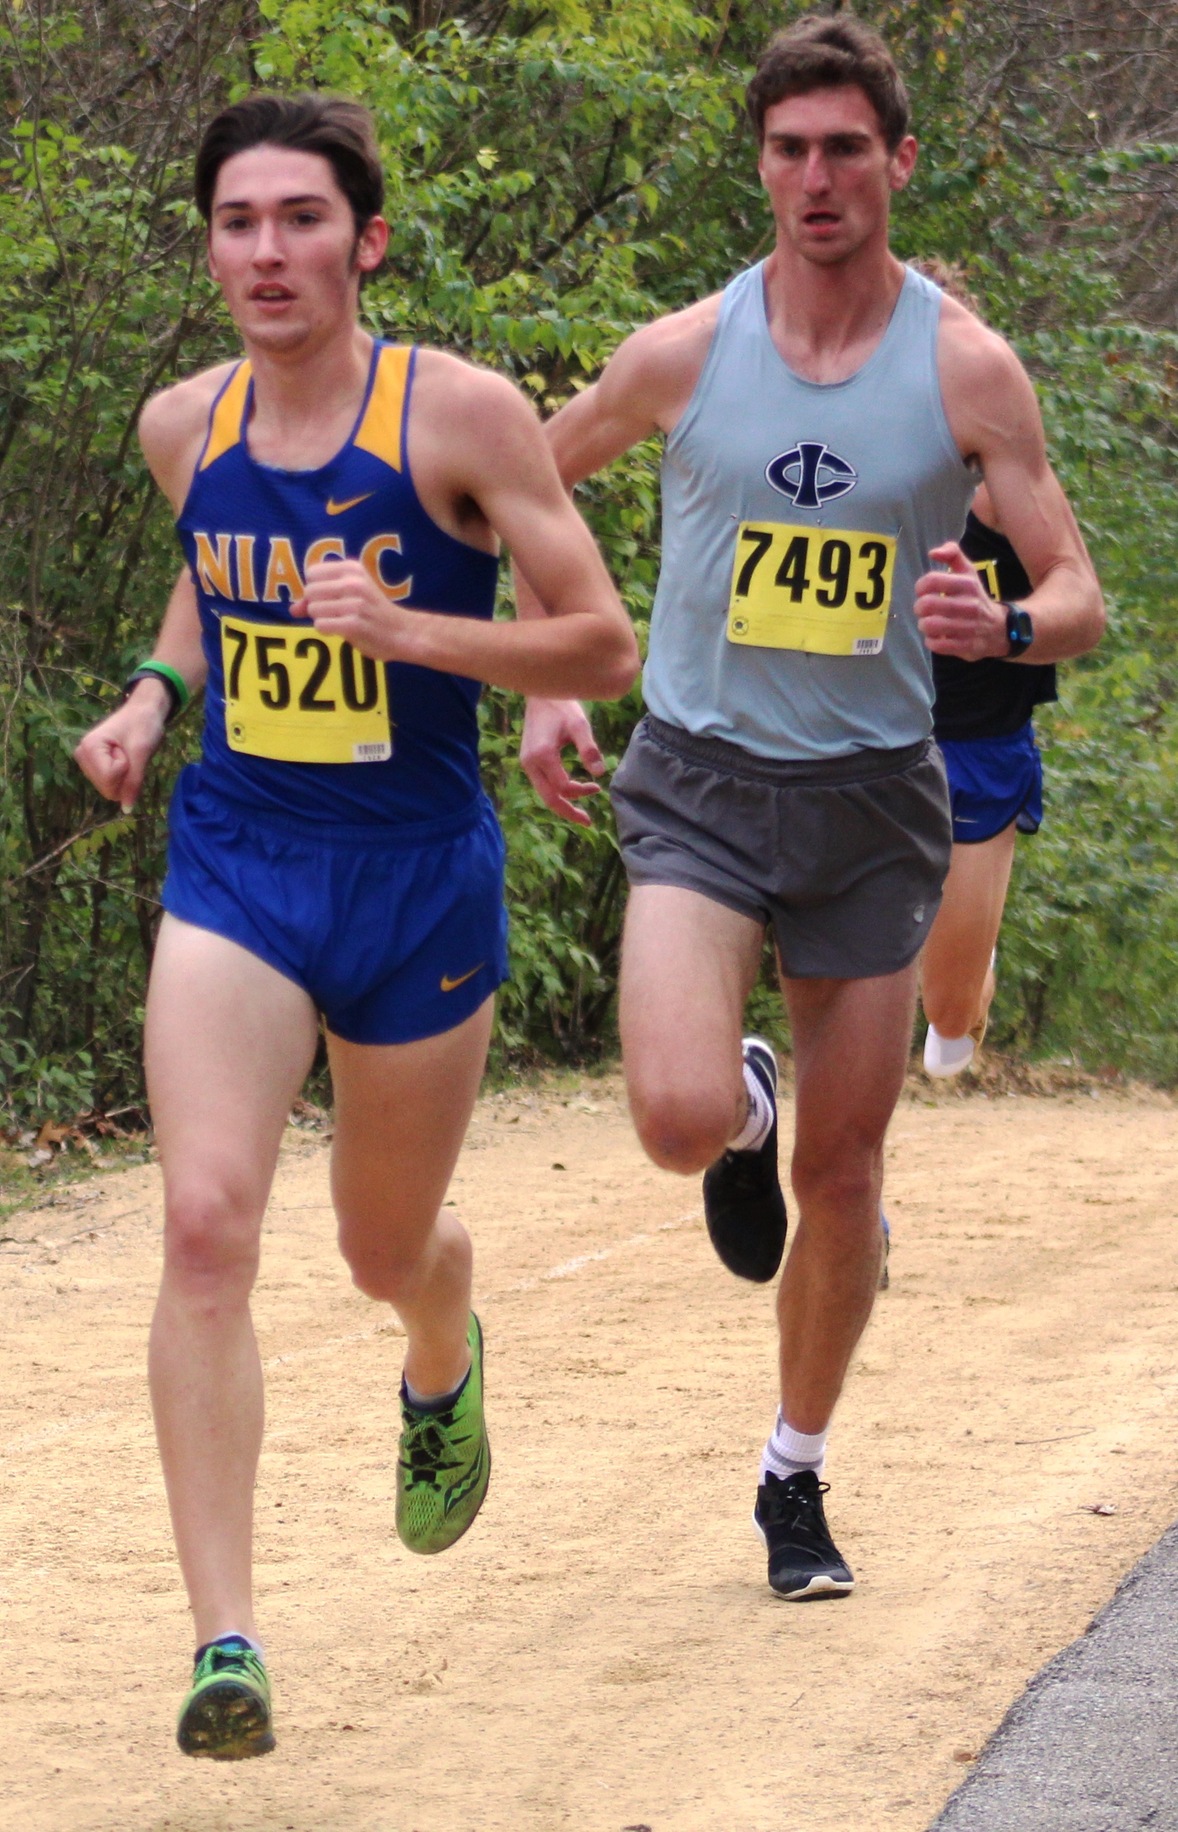 NIACC's Gavin Connell runs at the regional meet in Bettendorf on Oct. 26.